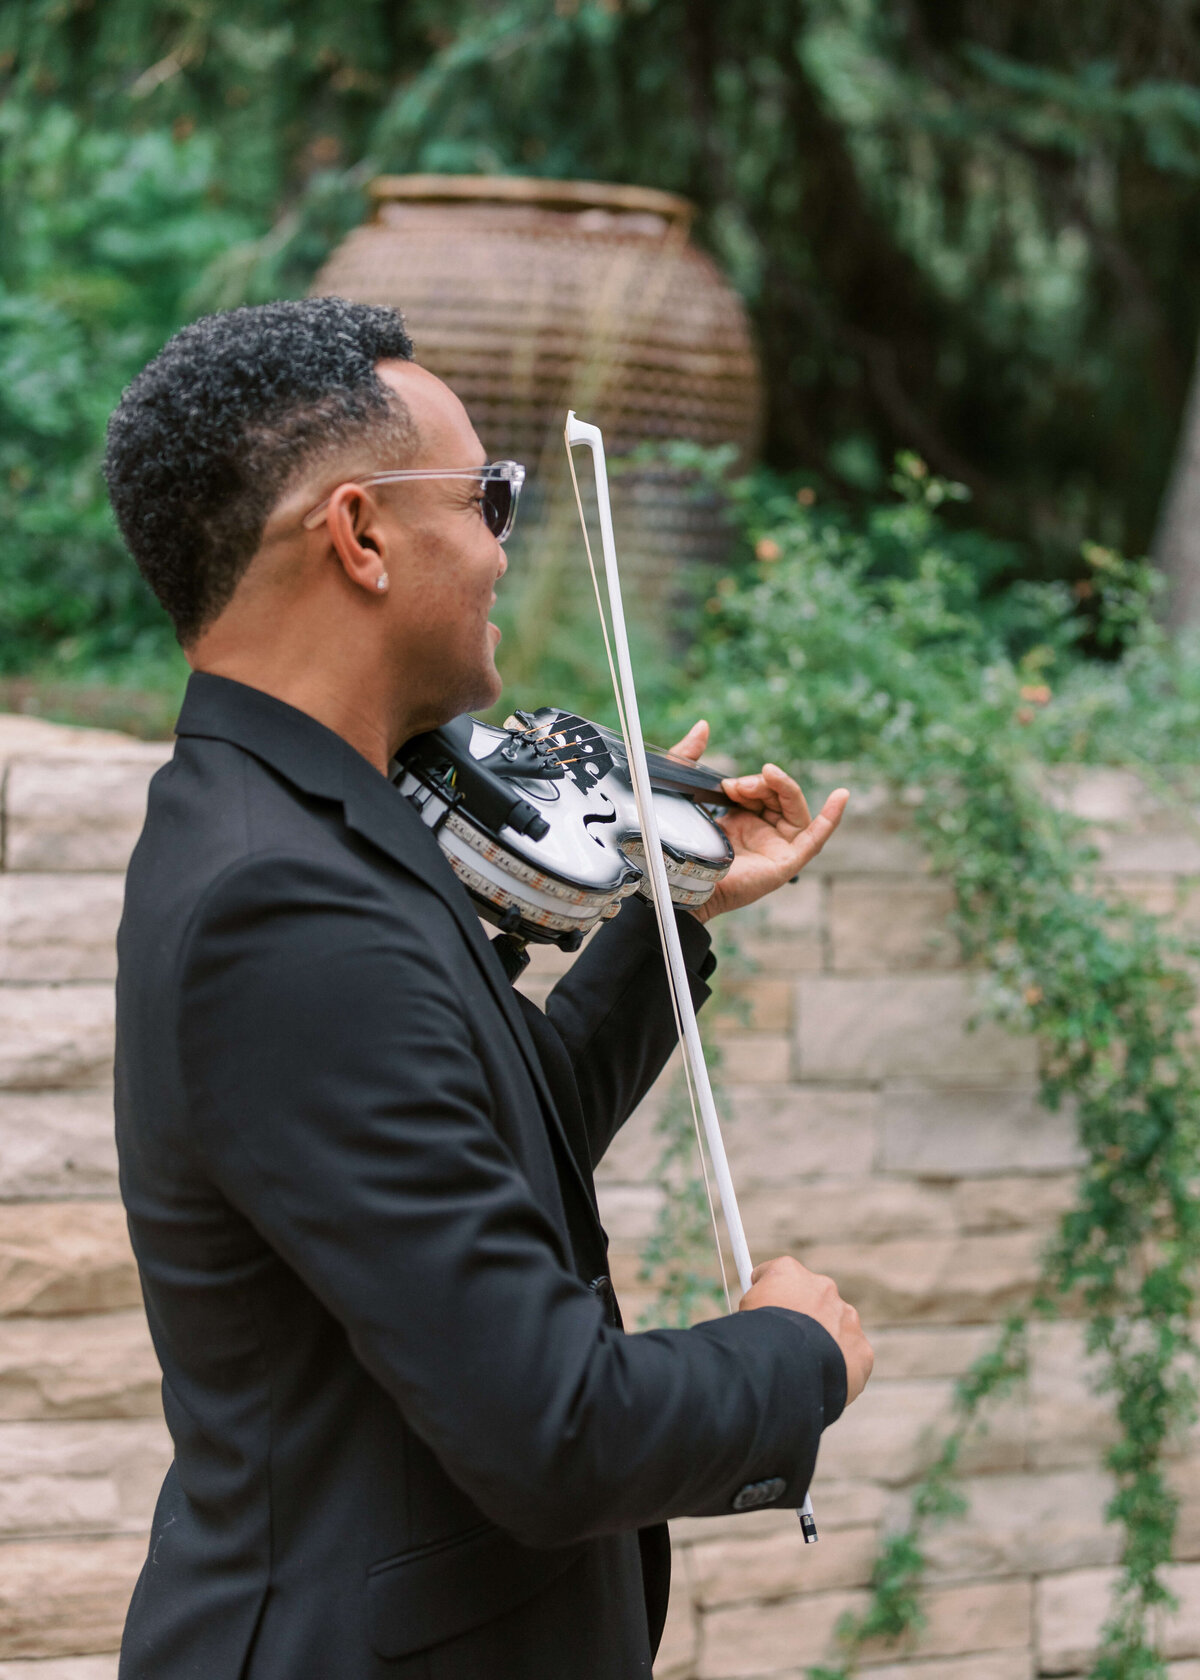 Violinist serenades the guests during the cocktail hour at a garden wedding